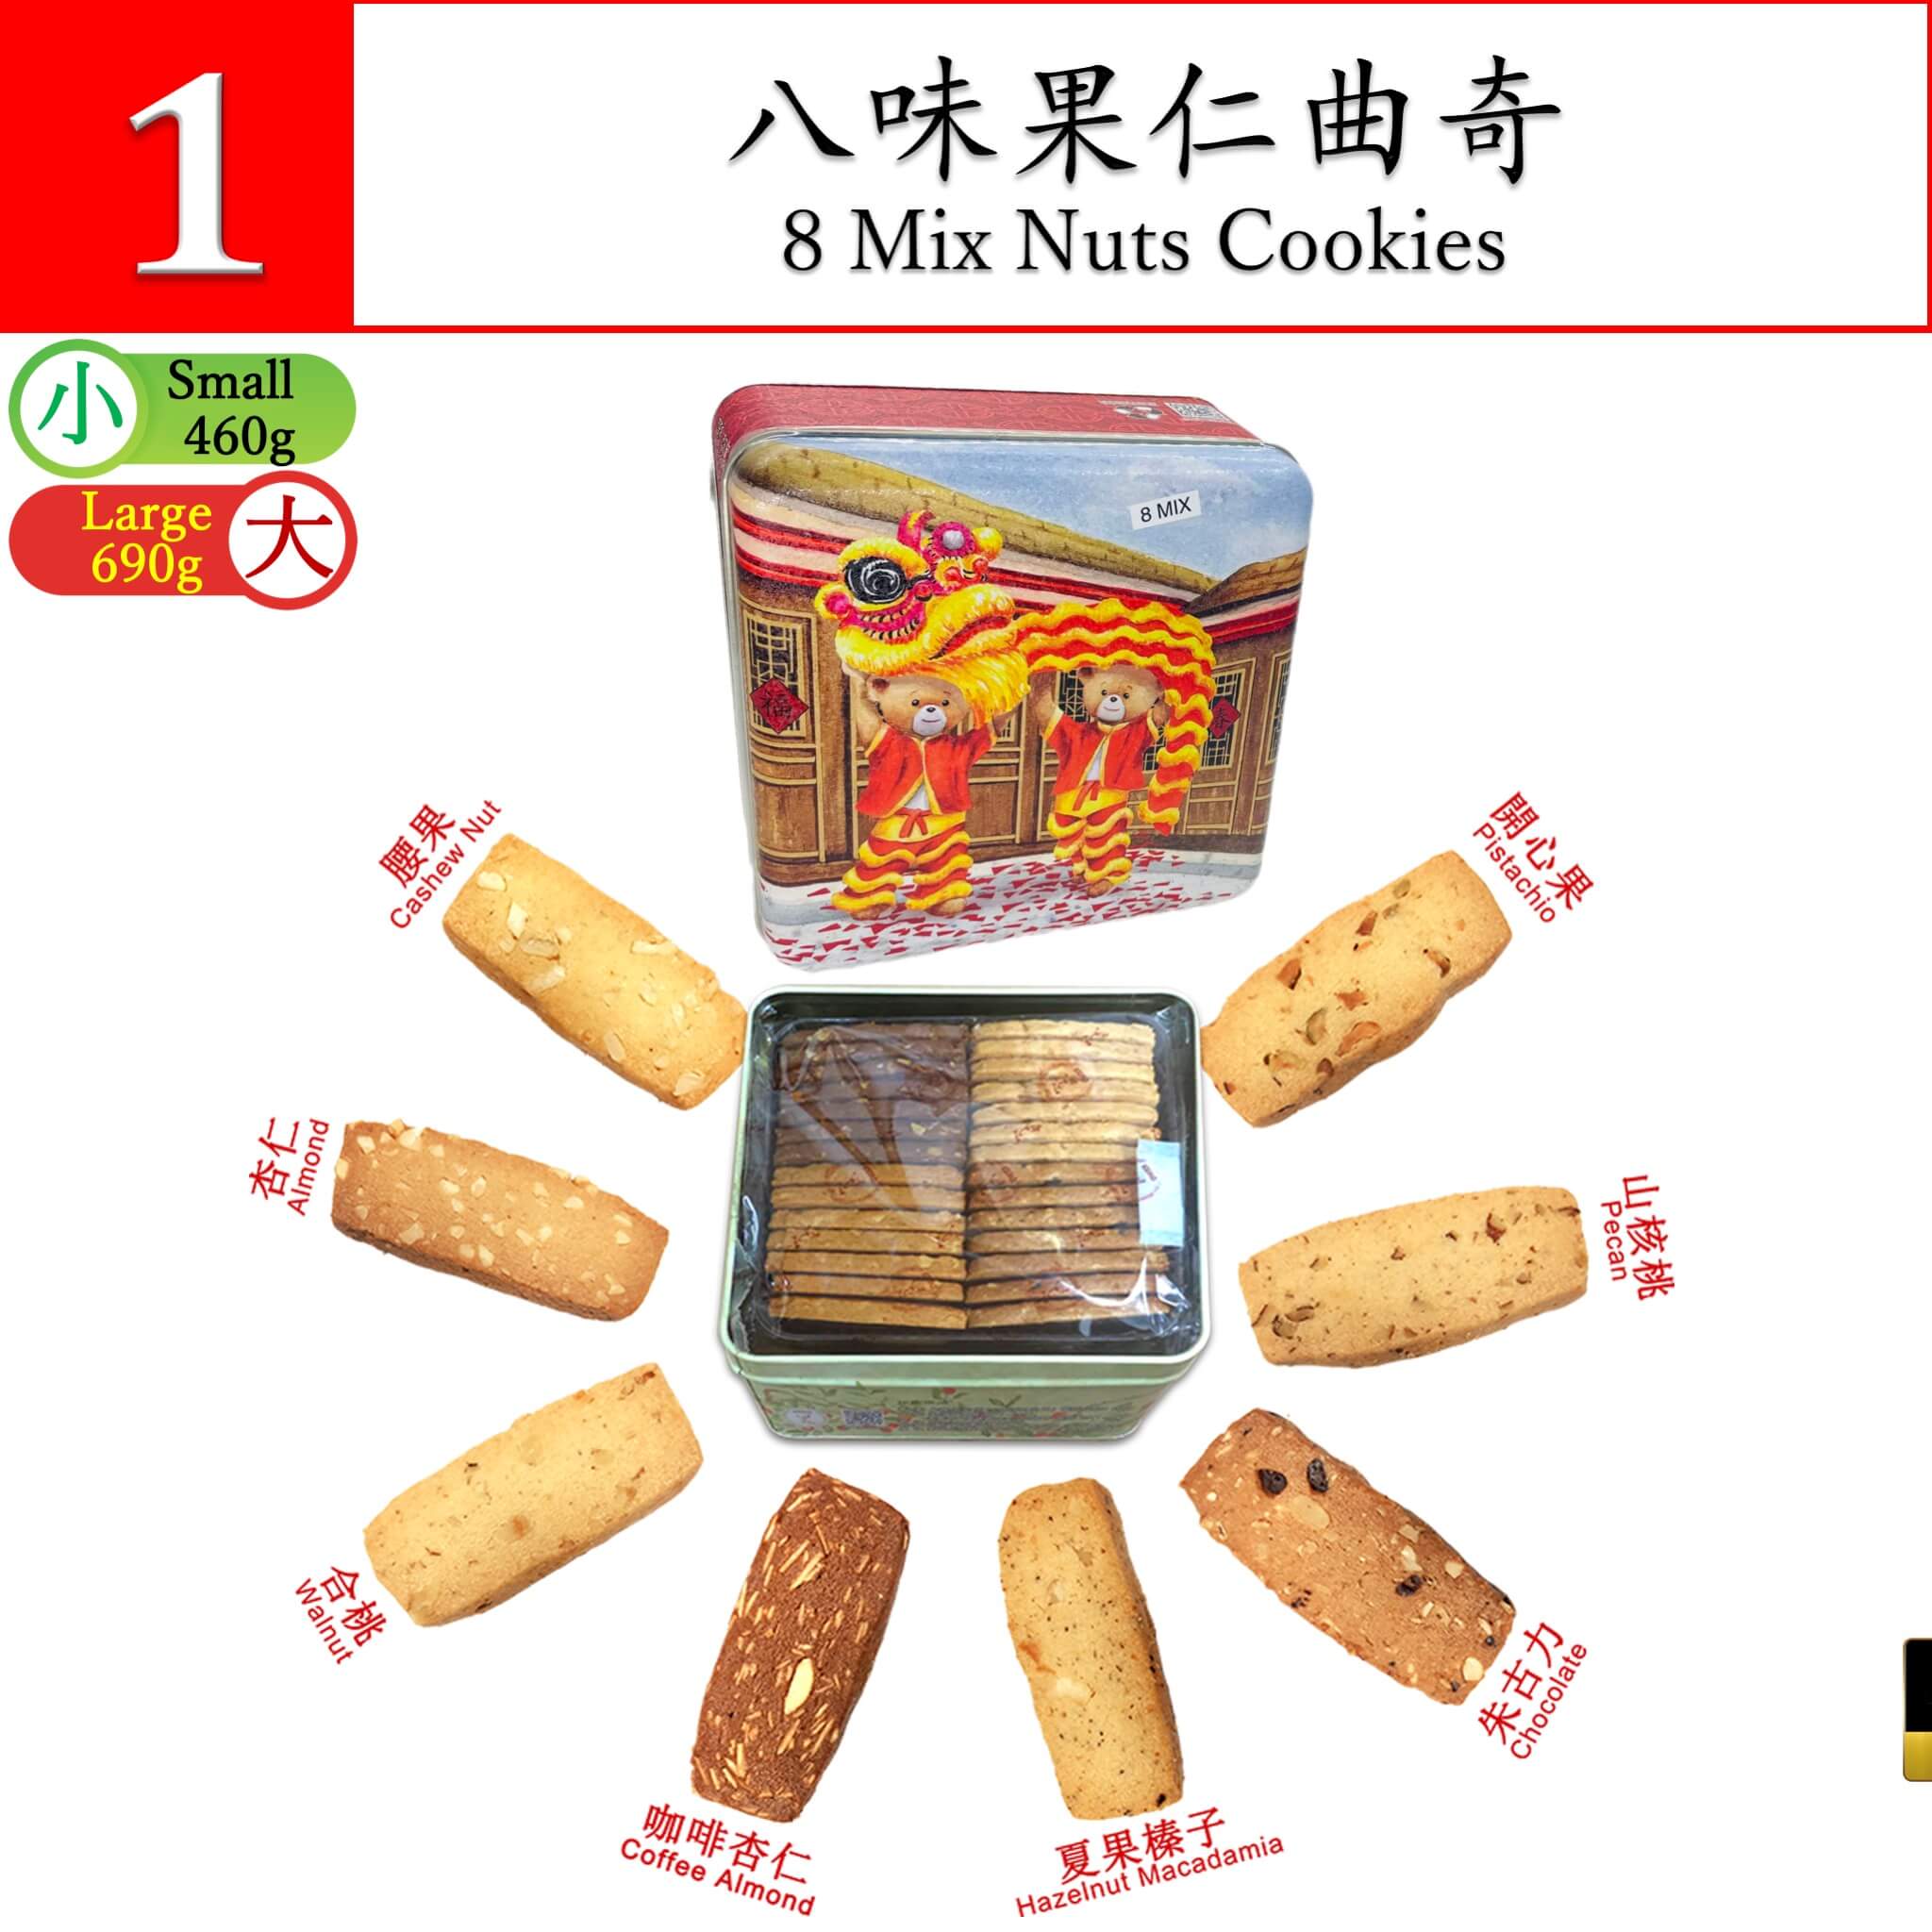 8 Mix Nuts Cookies 460g (S) 690g (L)